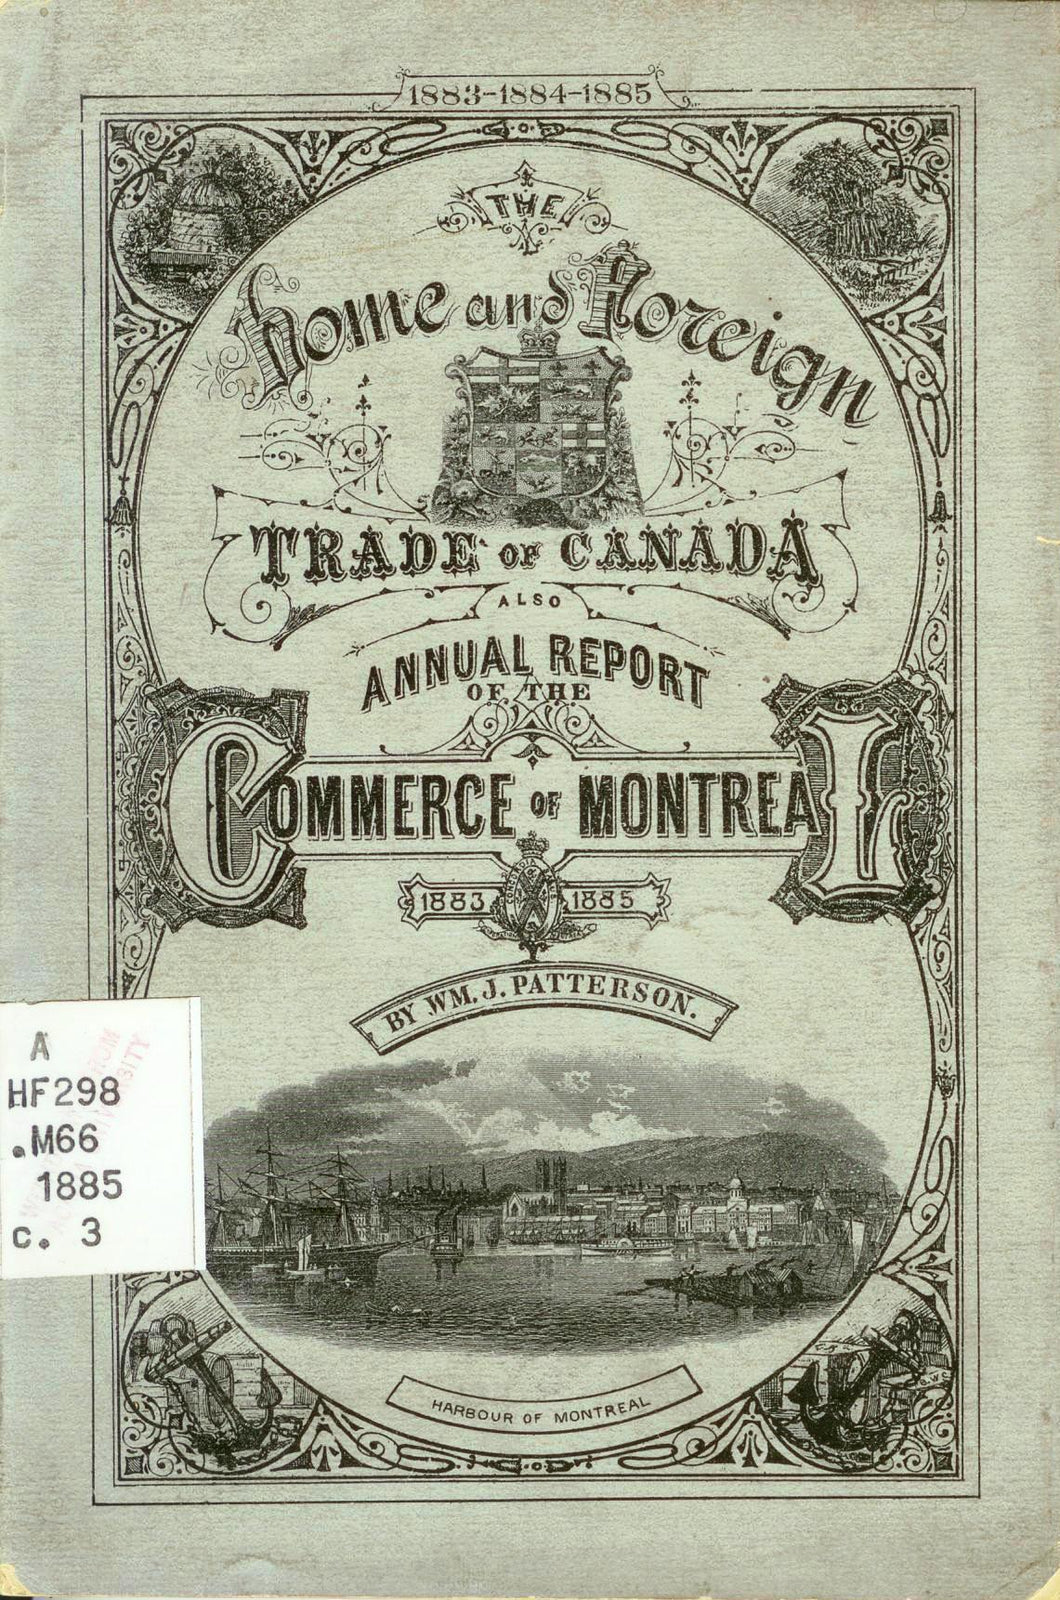 Statements Relating to the Home and Foreign Trade of the Dominion of Canada; Also Annual Report of the Commerce of Montreal For 1883 to 1885